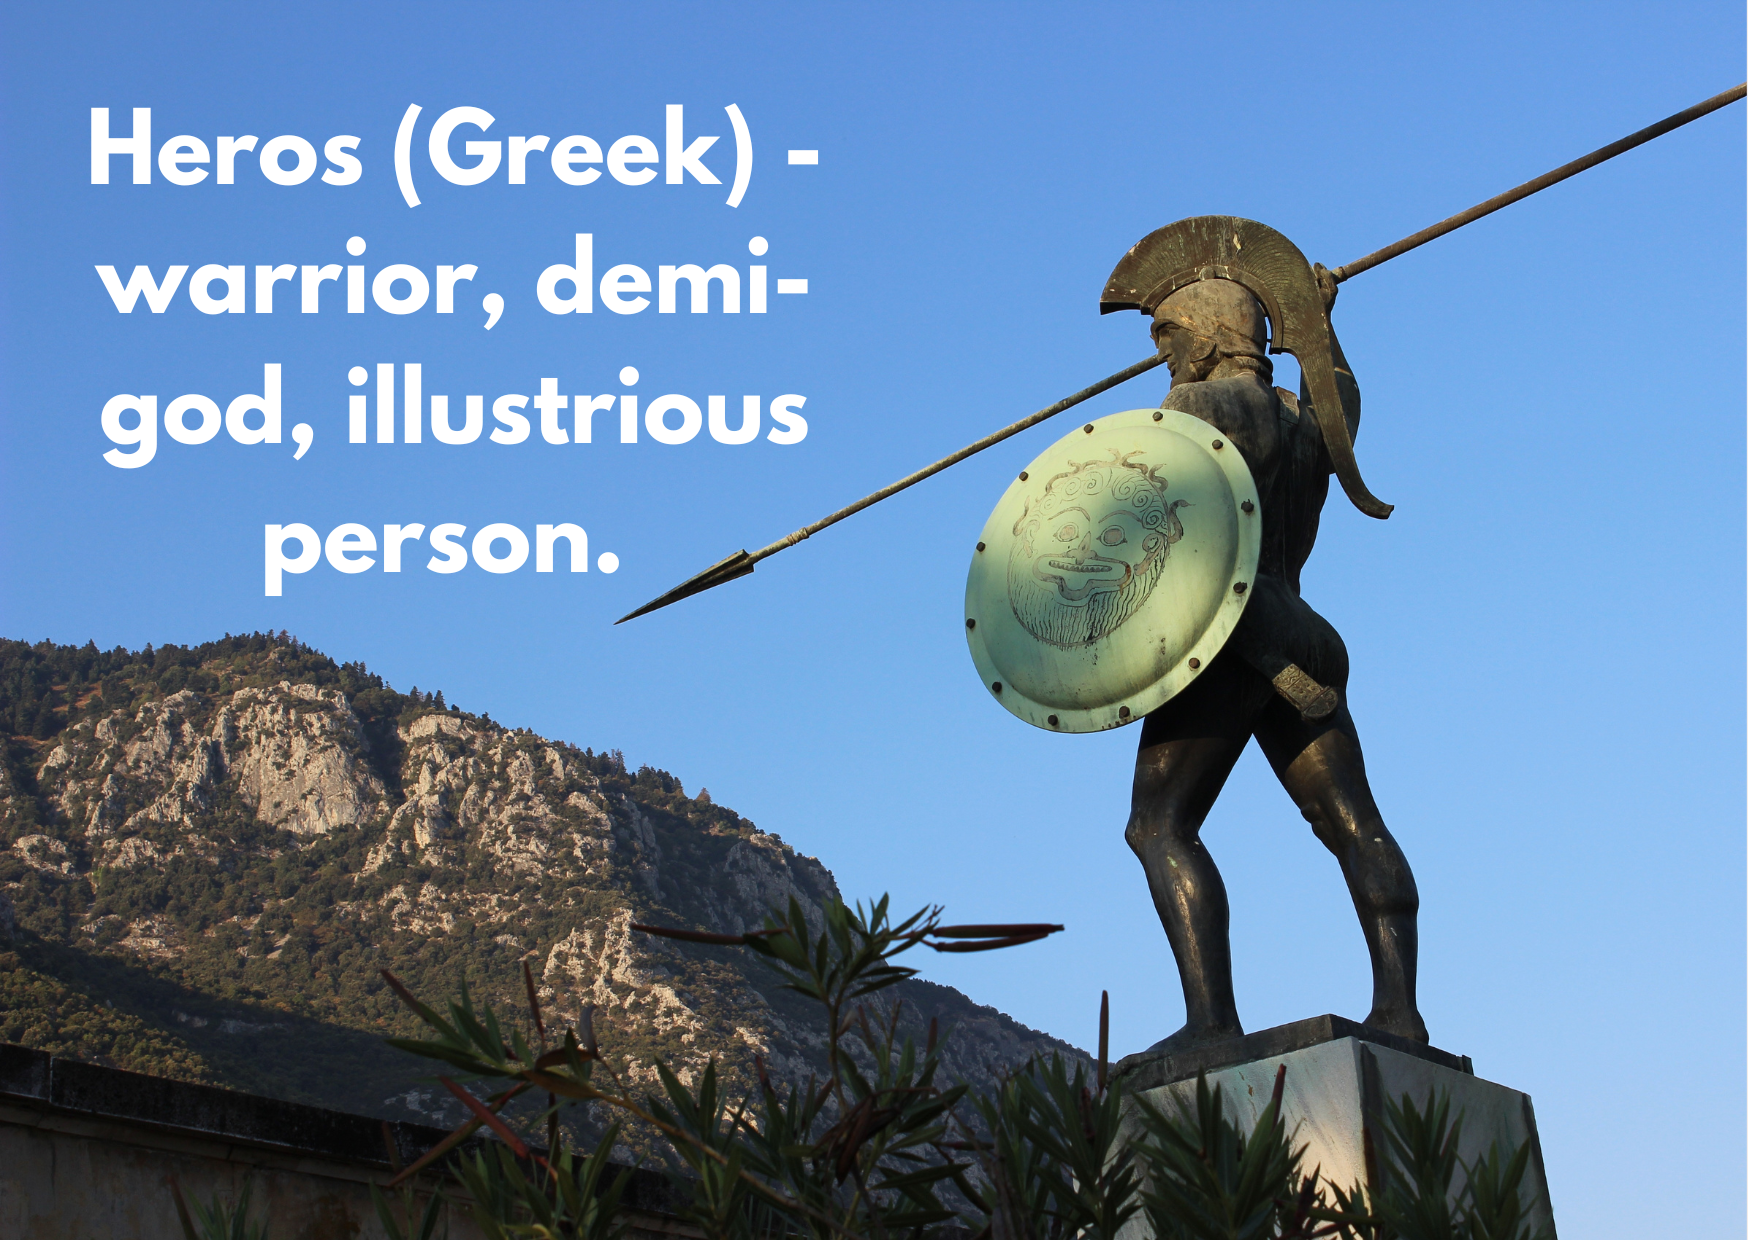 A stature of an Ancient Greek soldier with a spear and a caption explaining the Greek word "Heros" as "a warrior, demi-god, illustrious person"